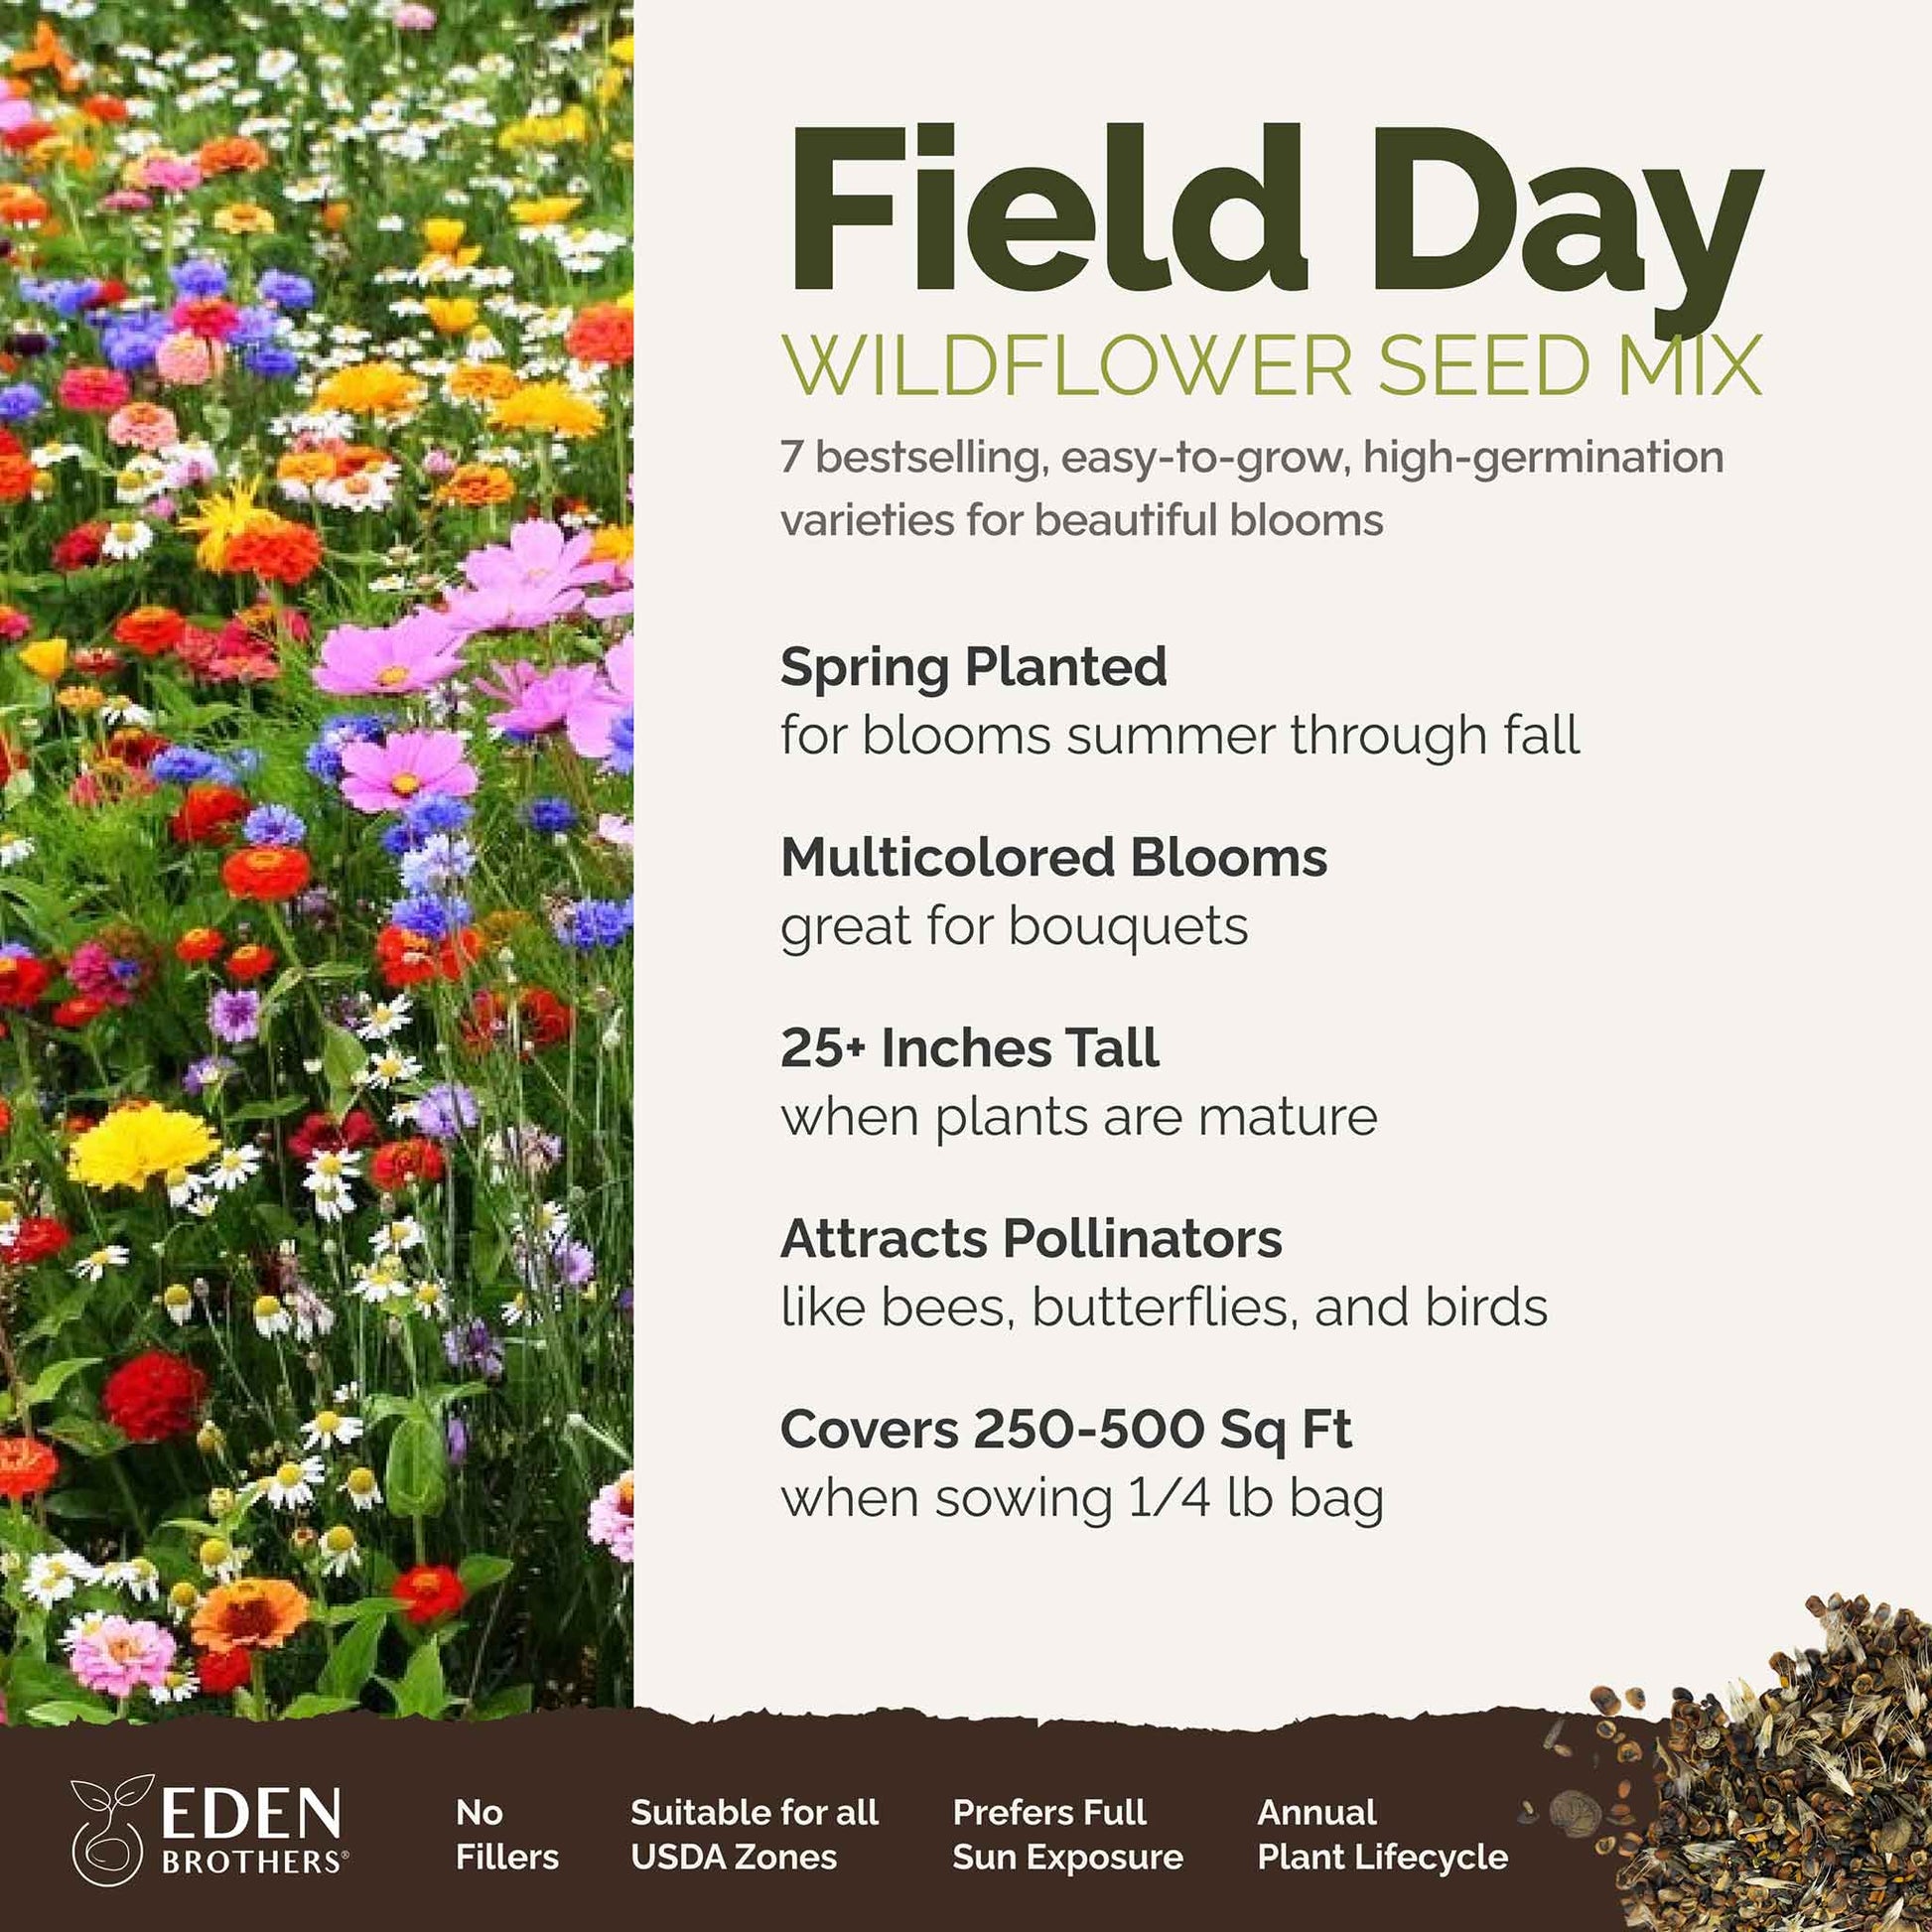 field day overview